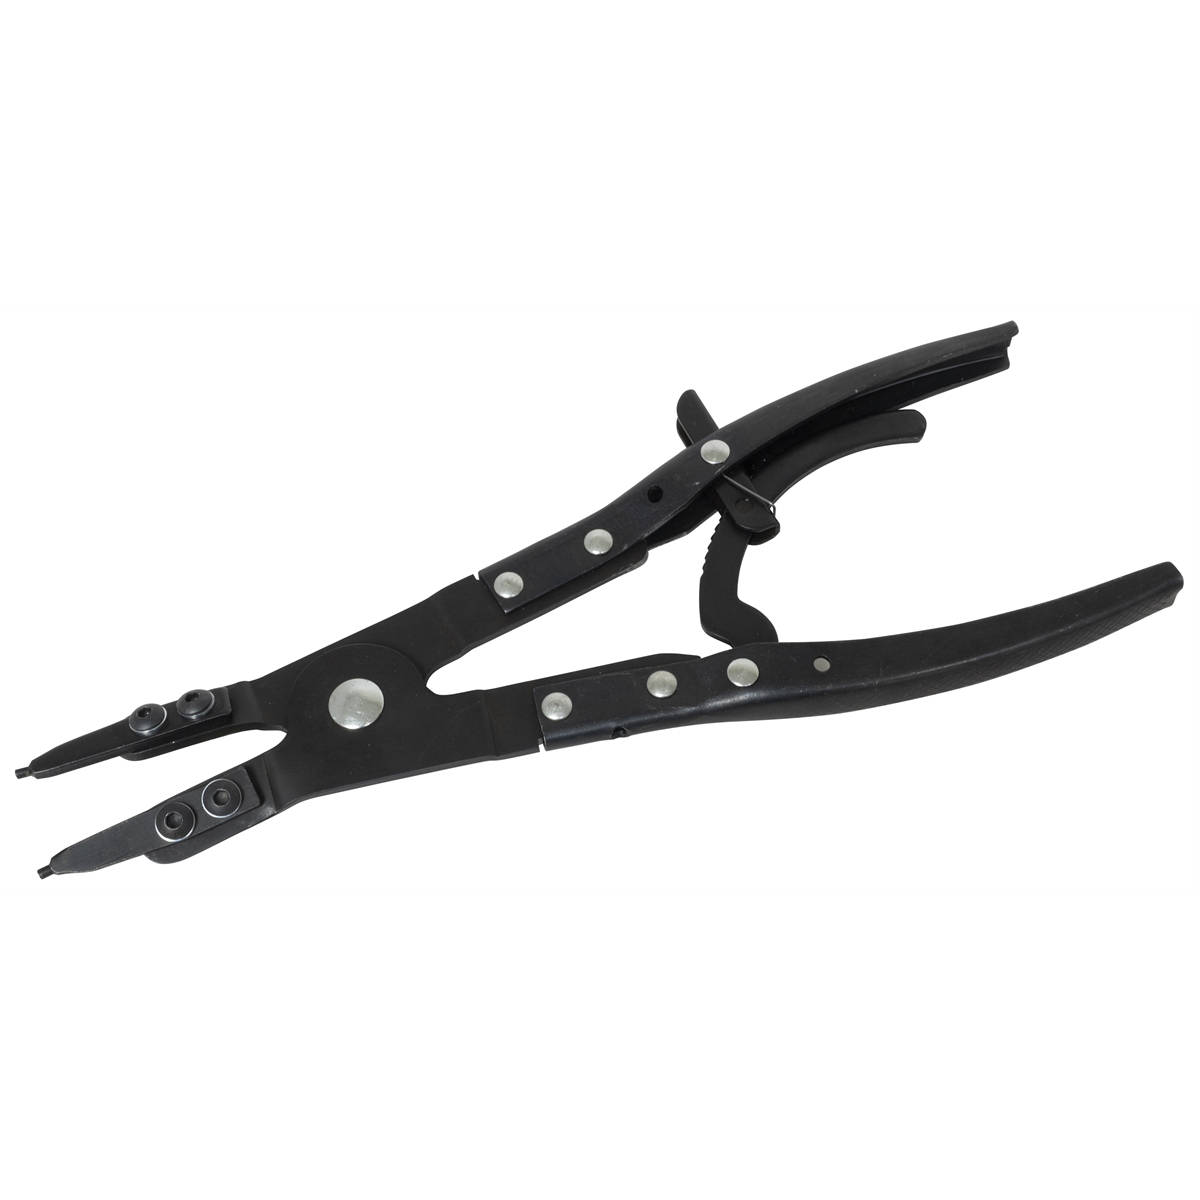 SPINDLE SNAPRINGPLIERS FOR